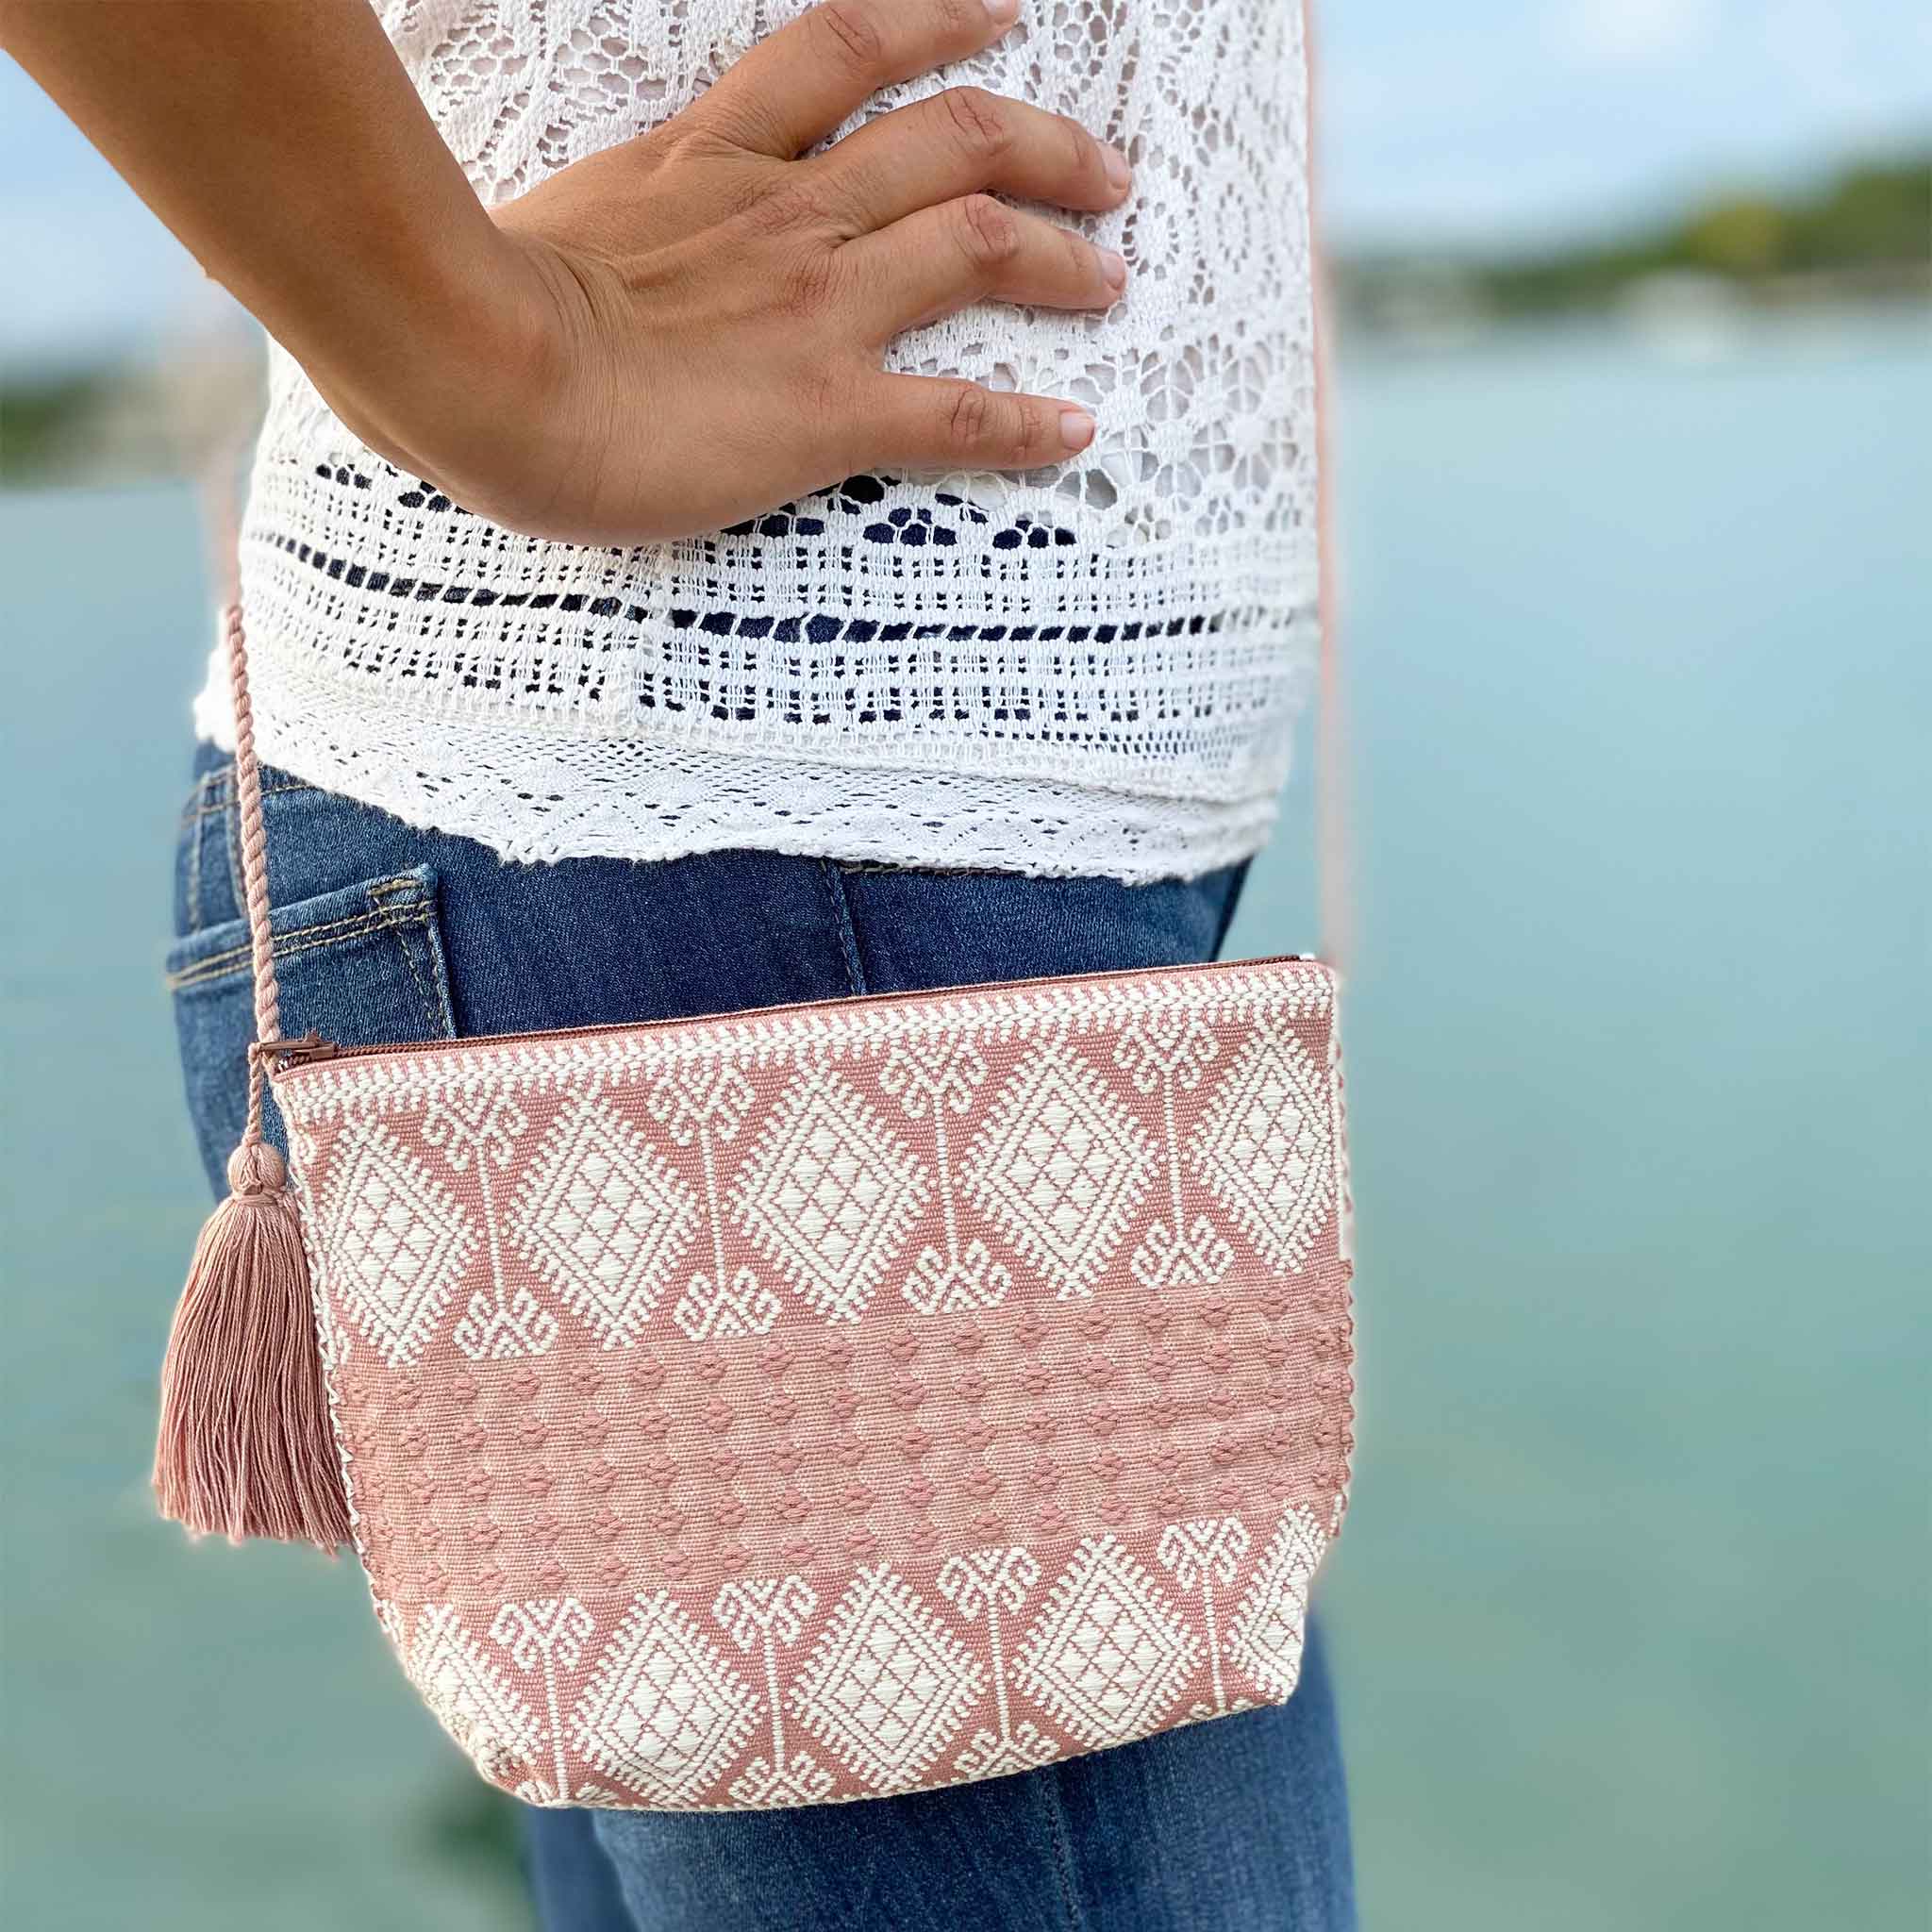 Embroidered Cross Body Purse - White/Pink